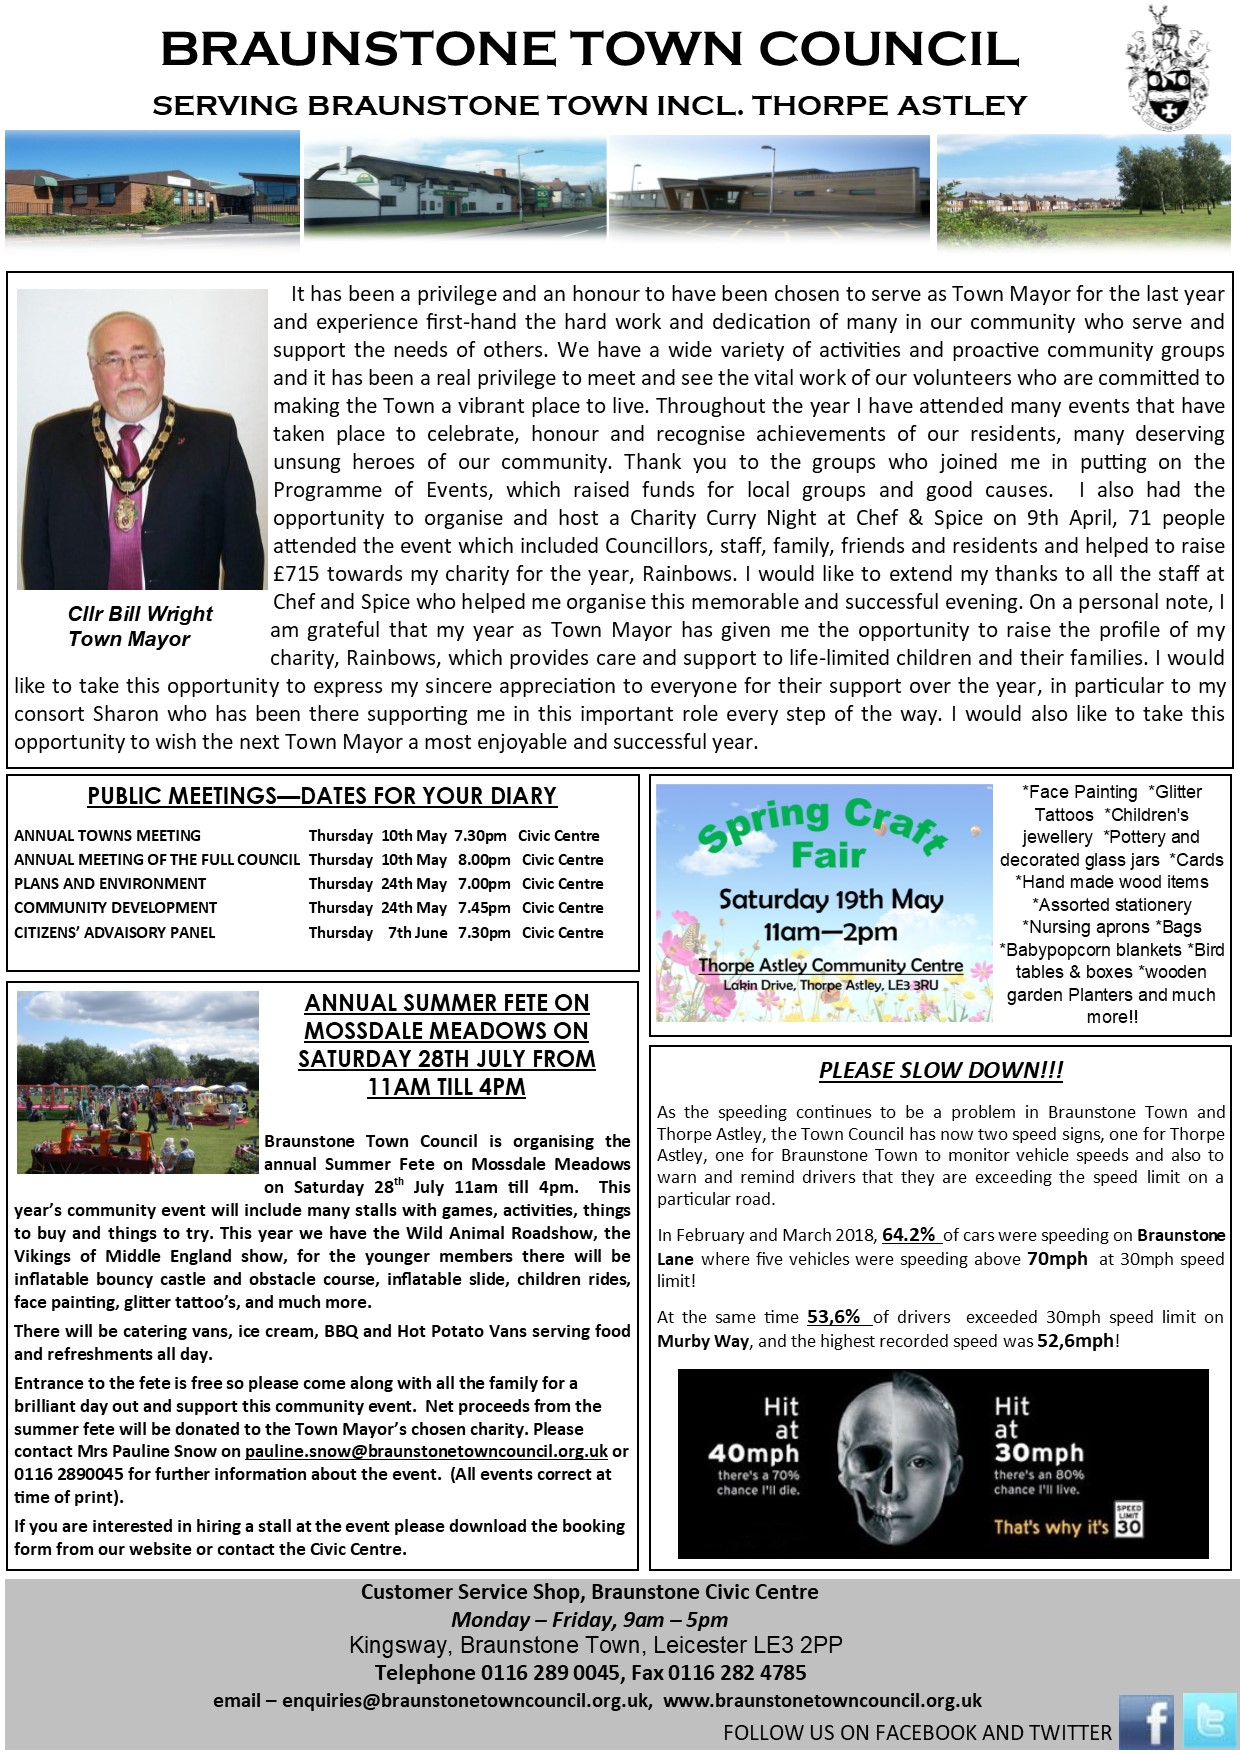 The Town Council article from the May 2018 issue of the Braunstone Life